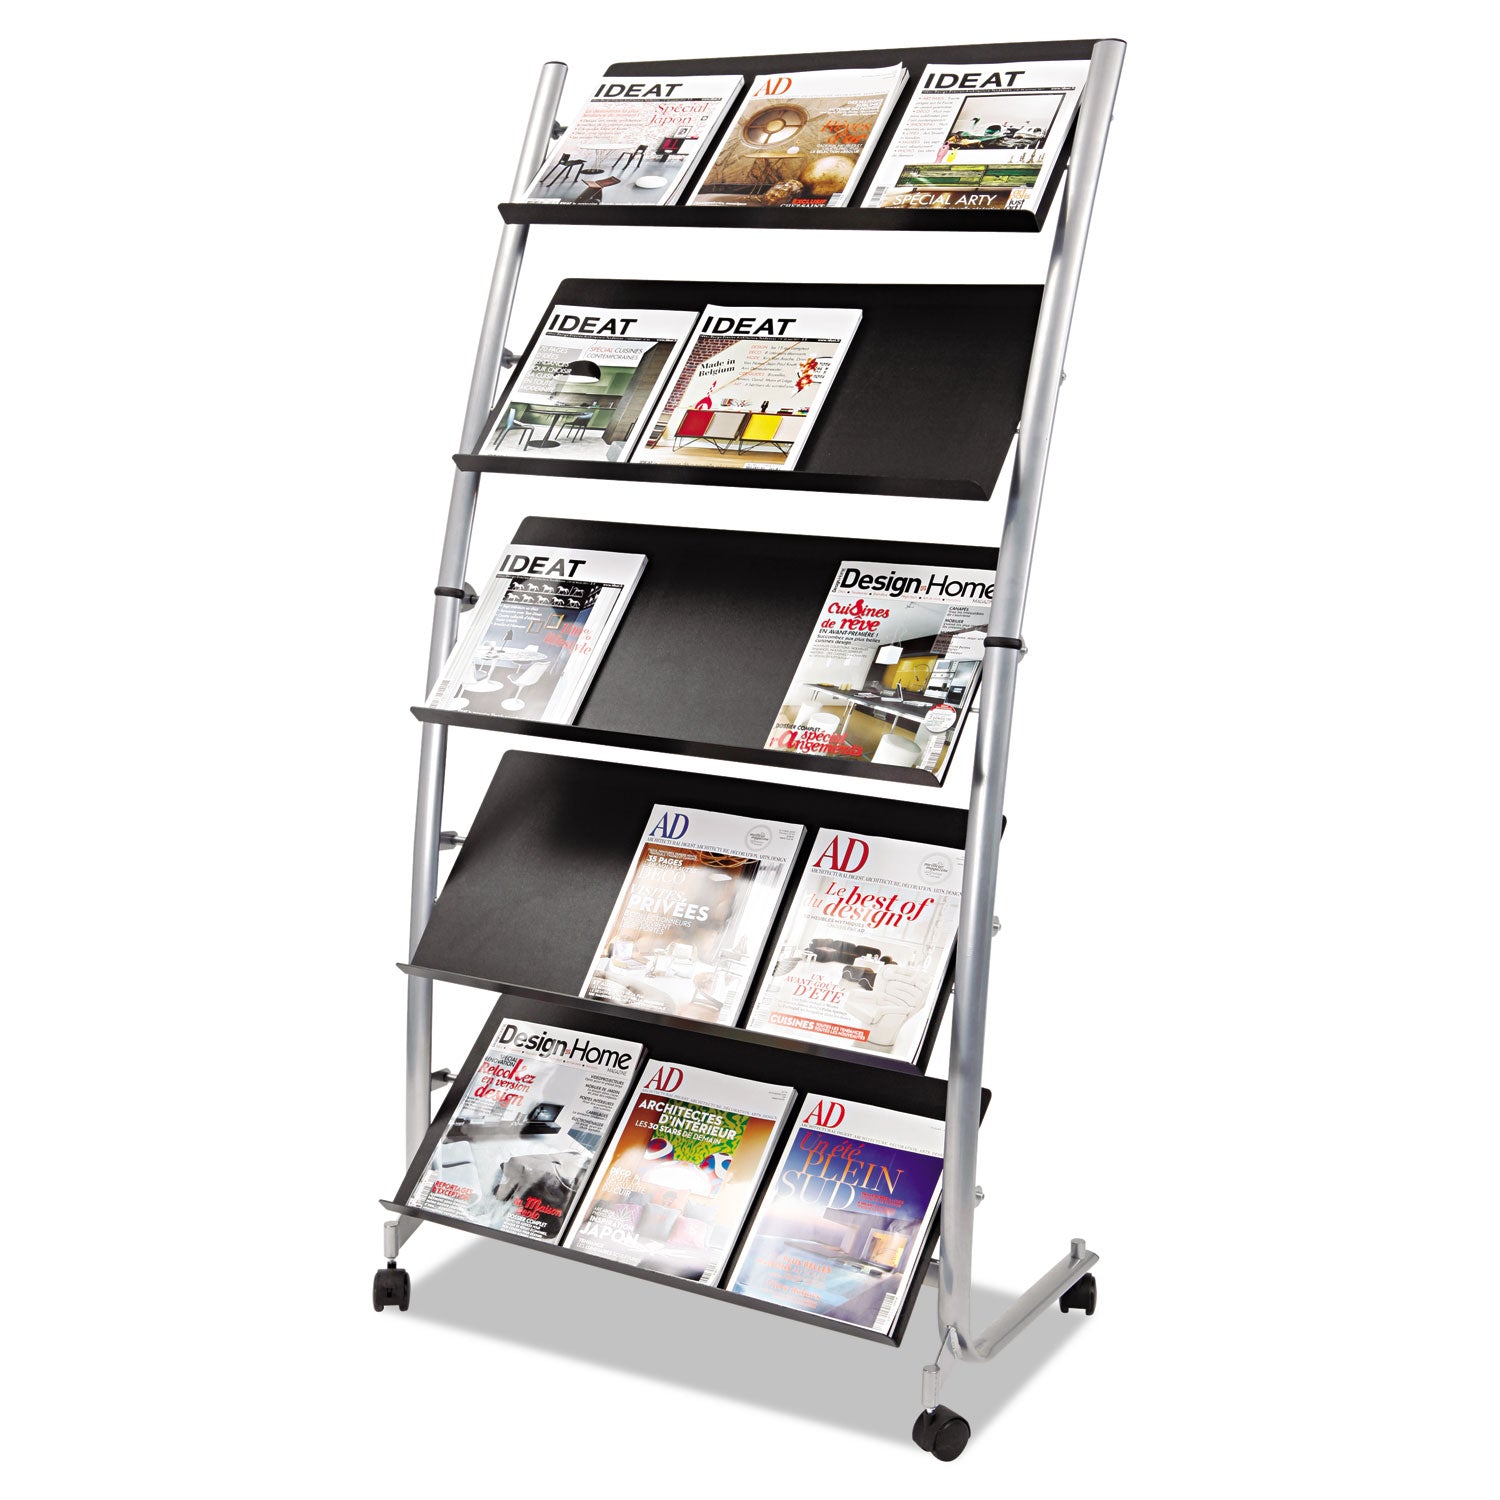 Alba Large Mobile Literature Display - 350 x Sheet - 5 Compartment(s) - Compartment Size 12.99" x 28.35" - 65.4" Height x 32.3" Width x 20.1" DepthFloor - Built-in Wheels - Metal, ABS Plastic - 1 Each - 1